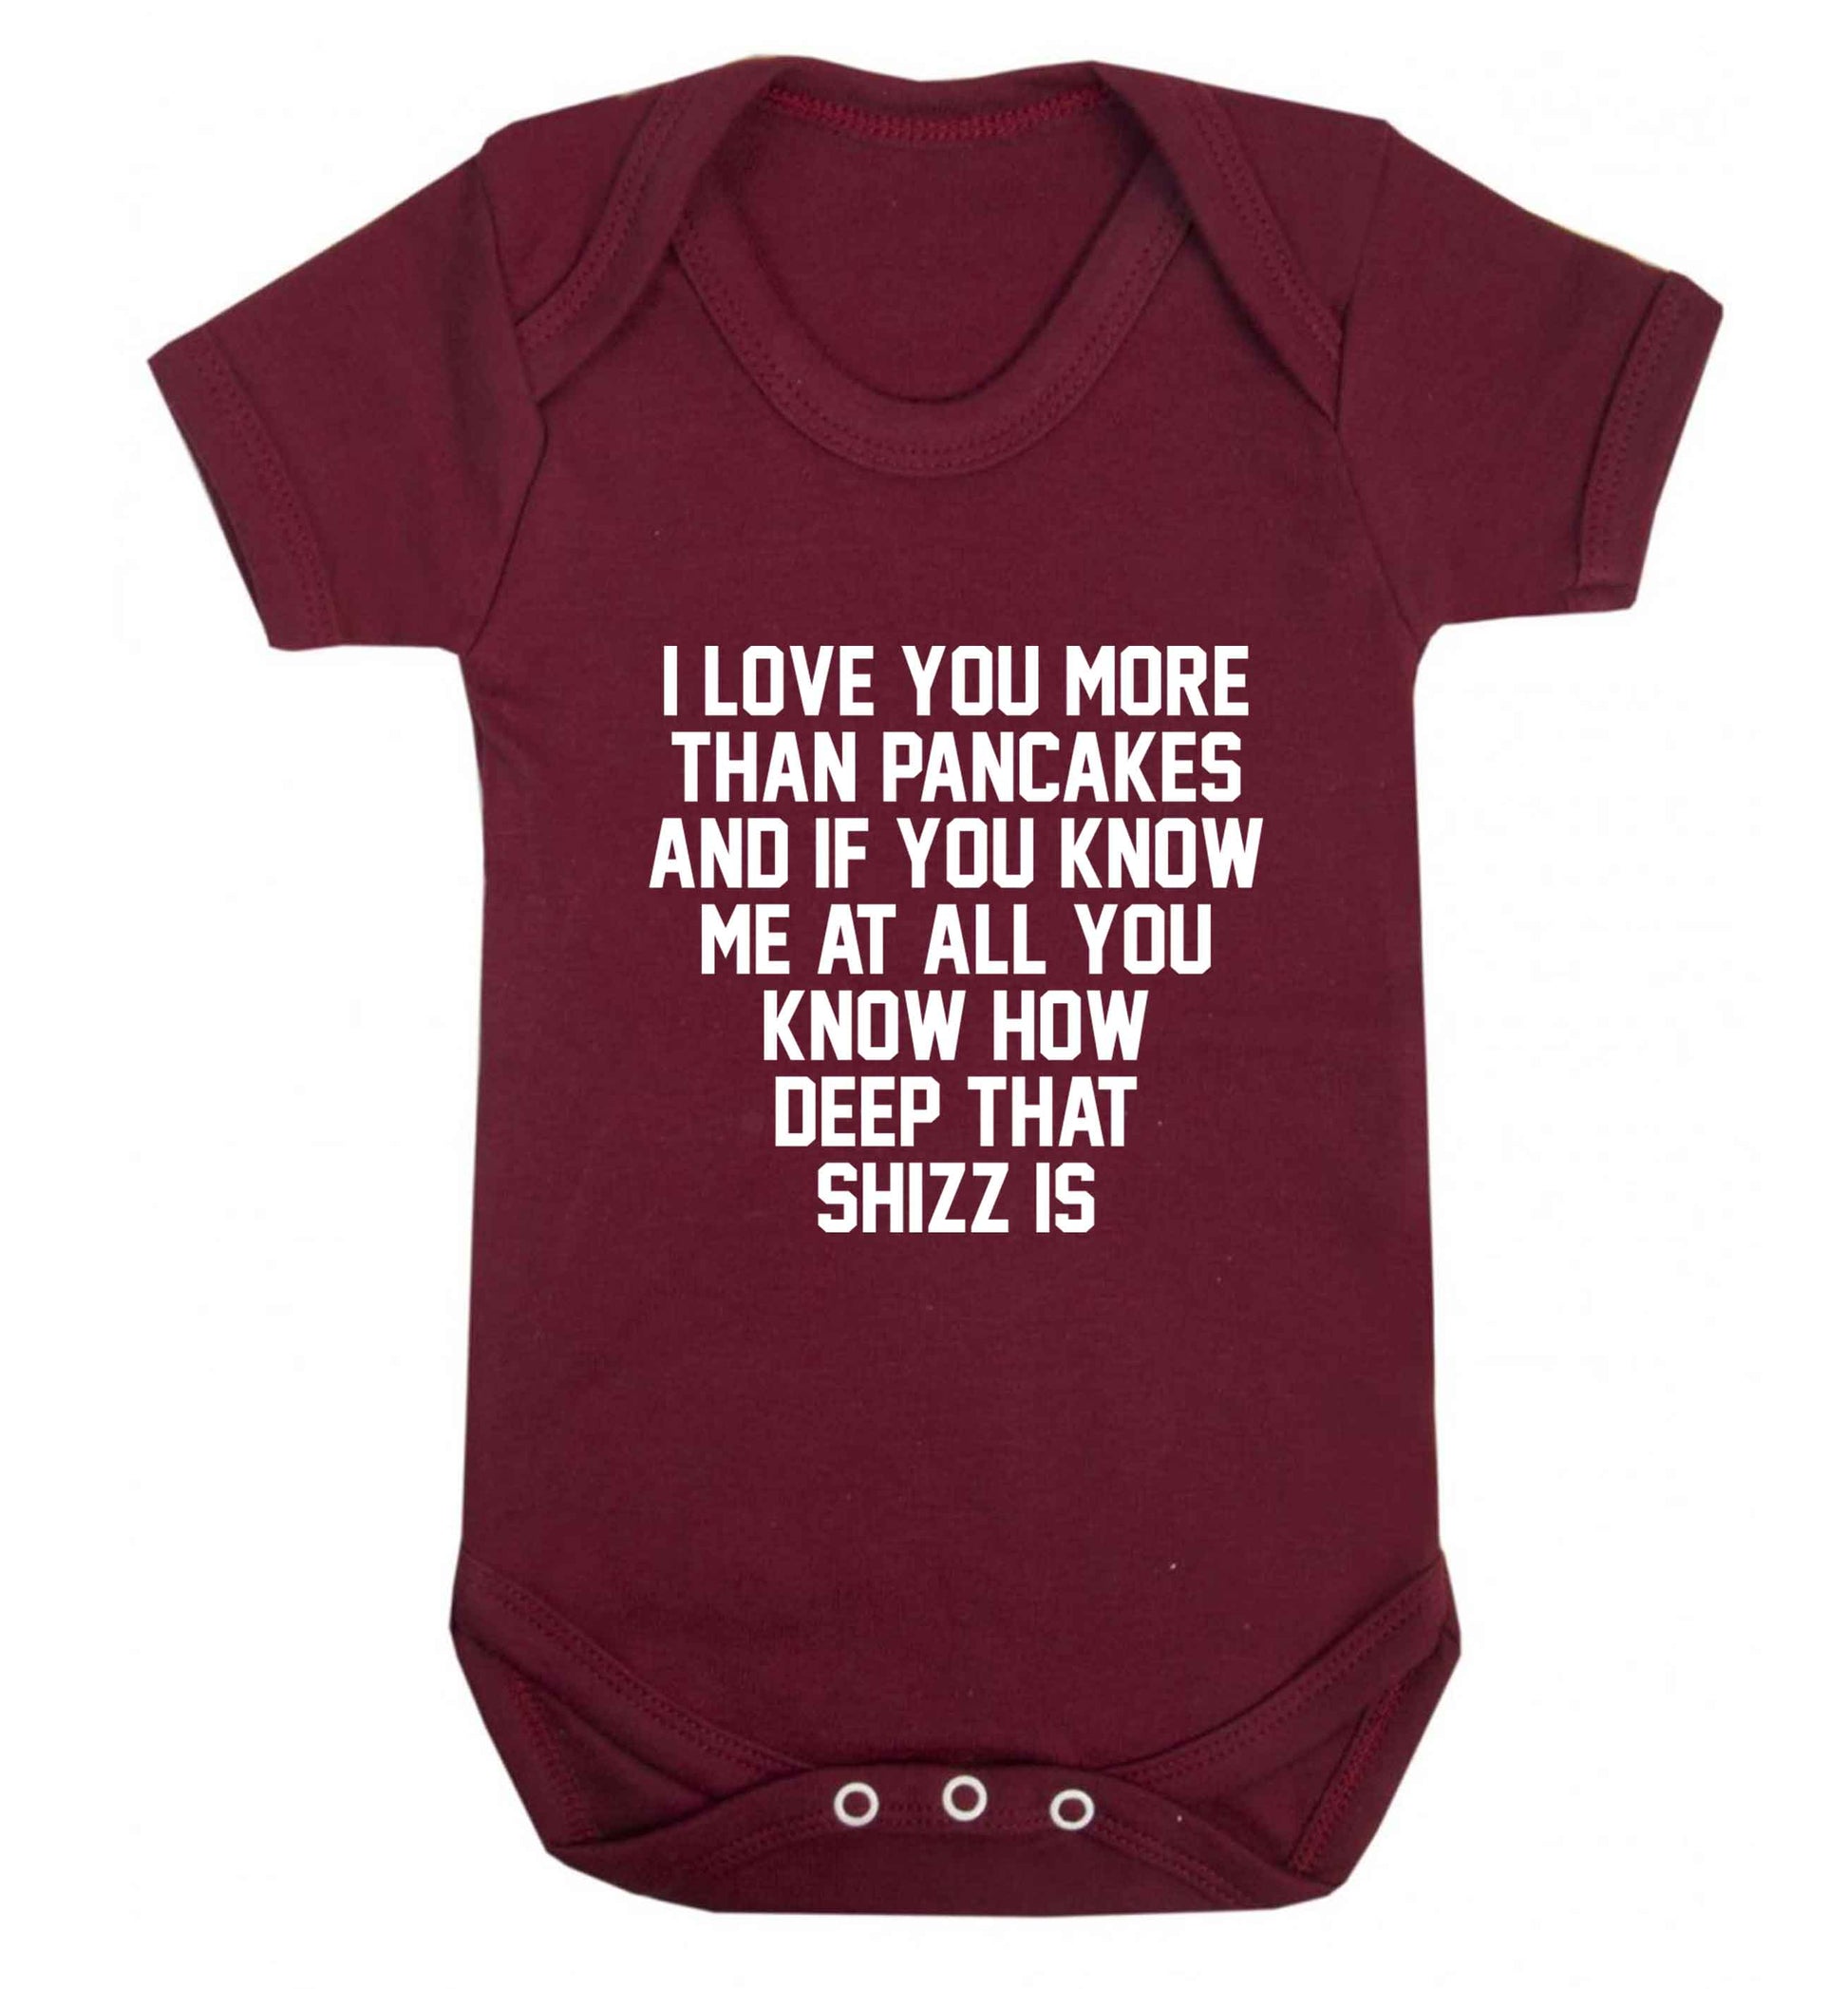 I love you more than pancakes and if you know me at all you know how deep that shizz is baby vest maroon 18-24 months